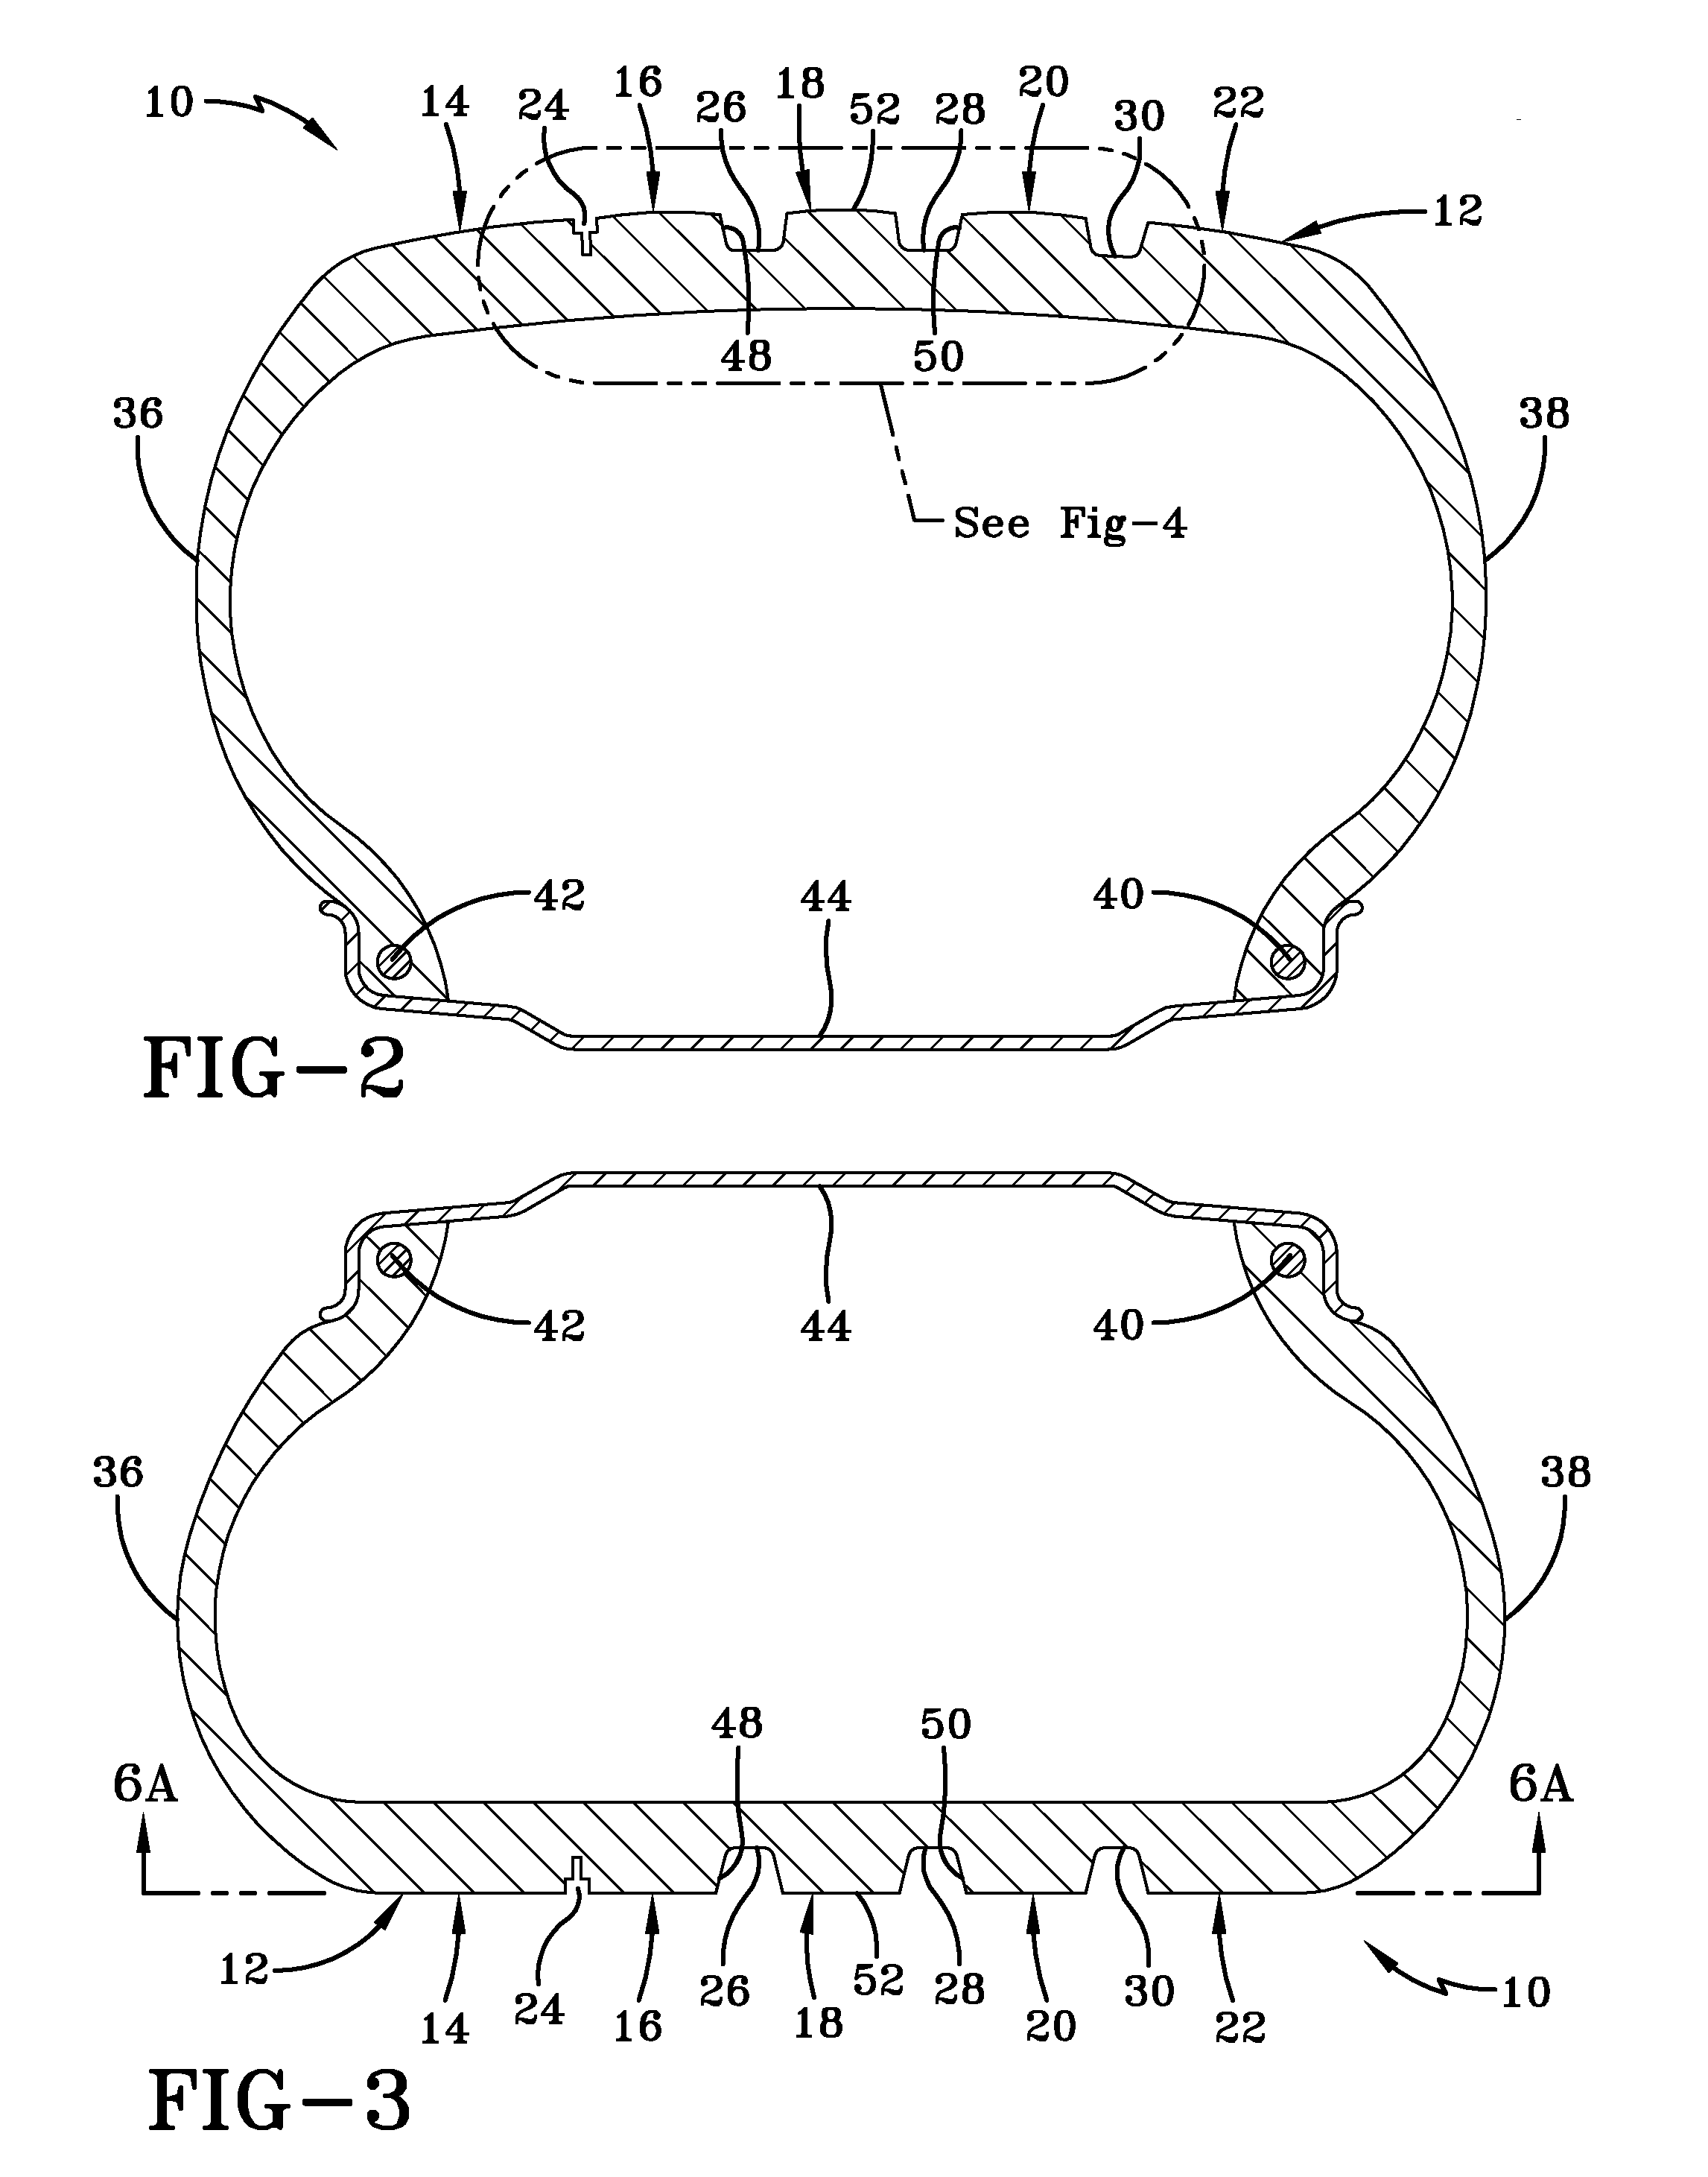 Tire tread having improved contact pressure distribution